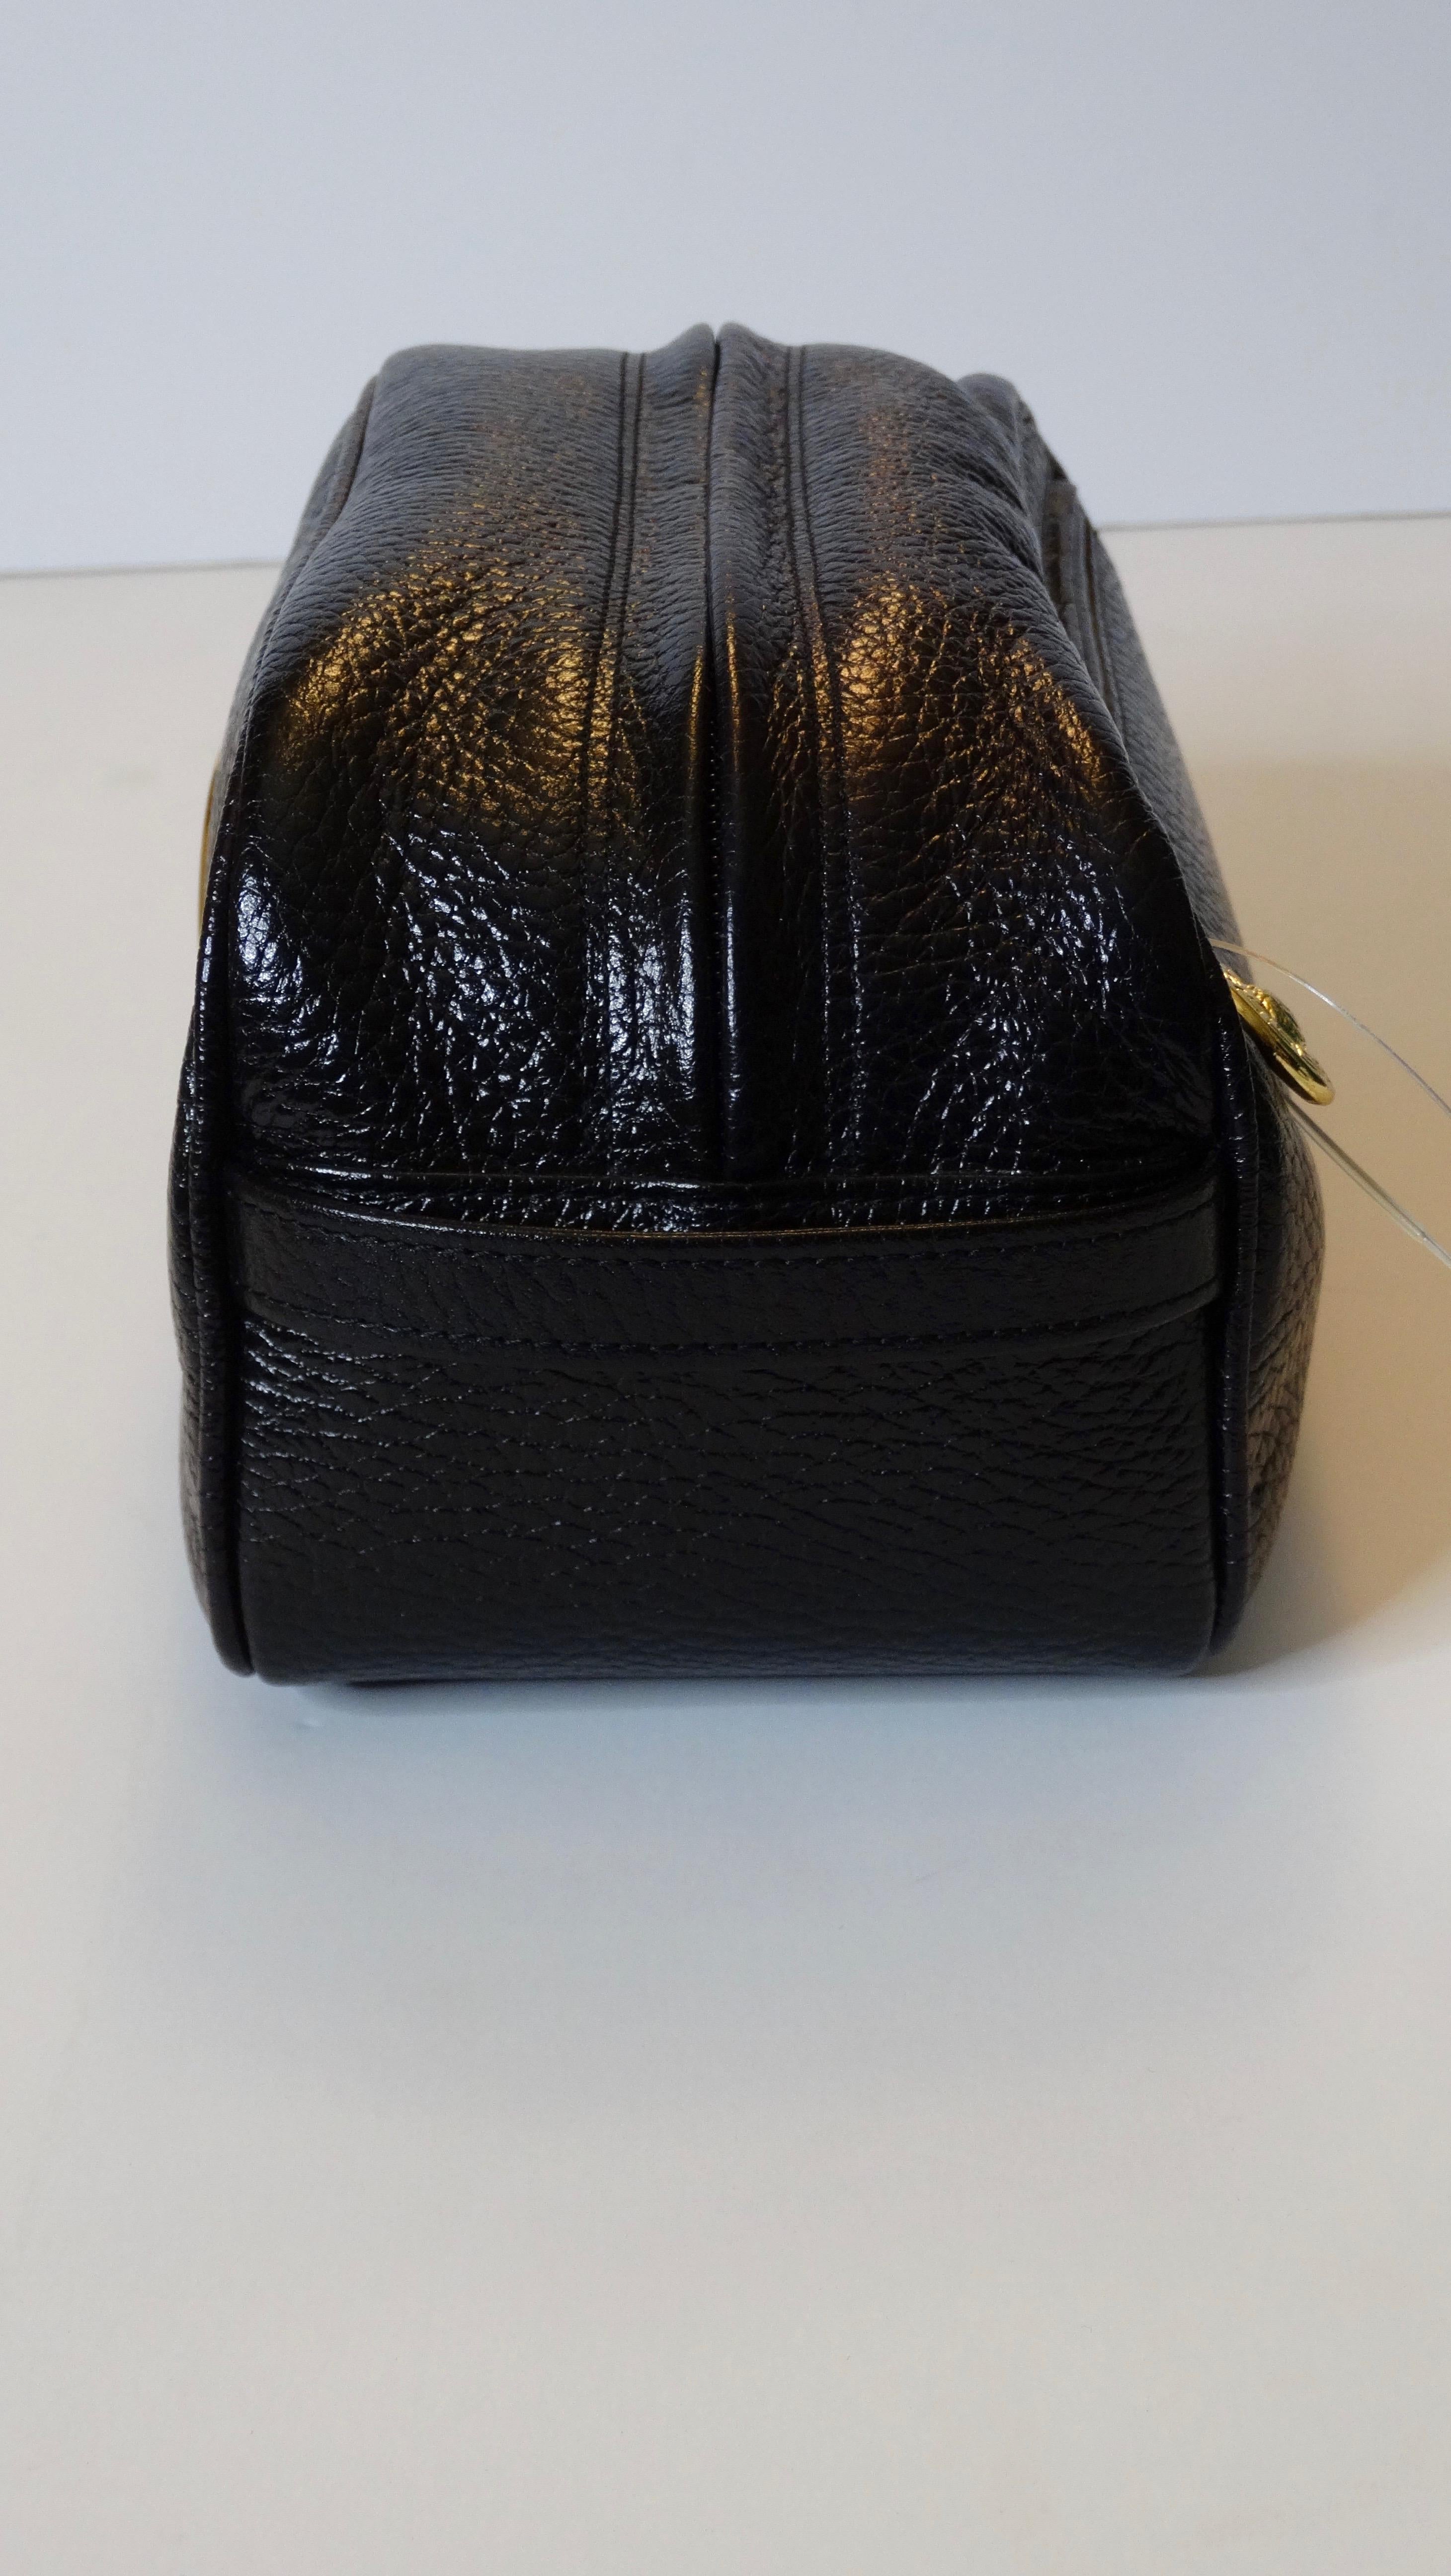 Gianni Versace 1990s Black Leather Cosmetic Bag 5